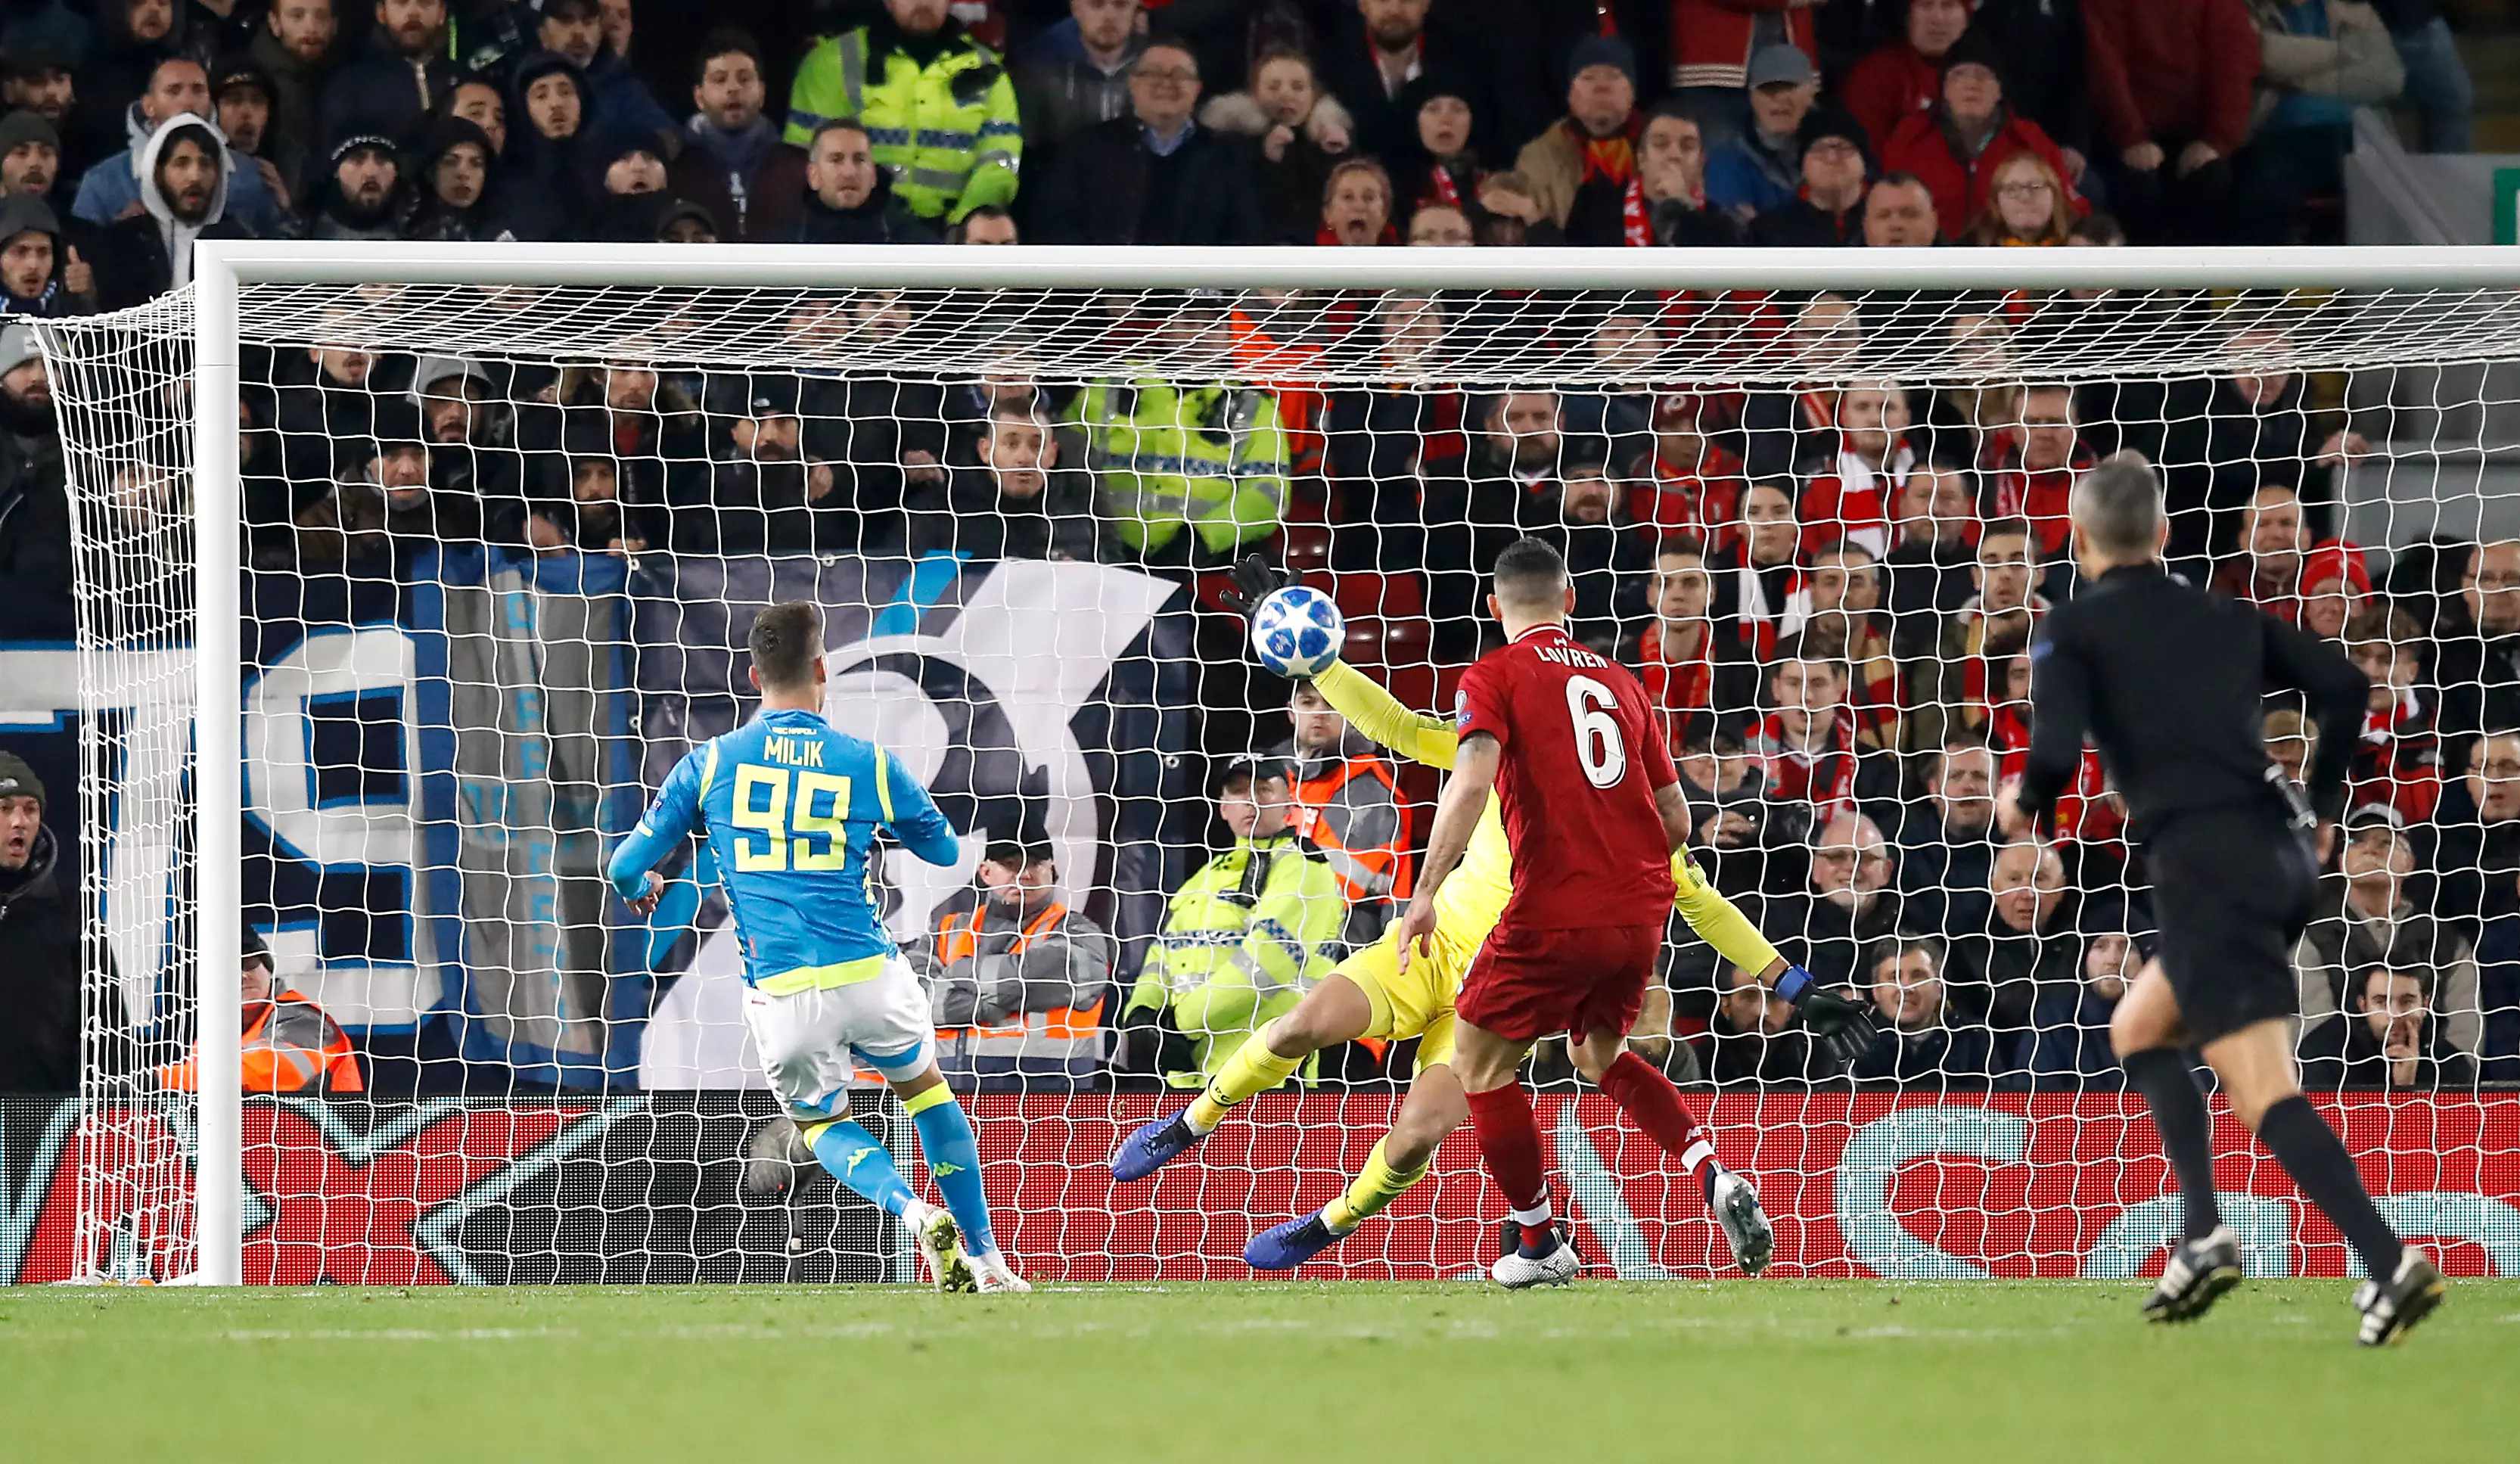 Alisson's save against Napoli in injury time was critical in getting Liverpool through to the knockout stages